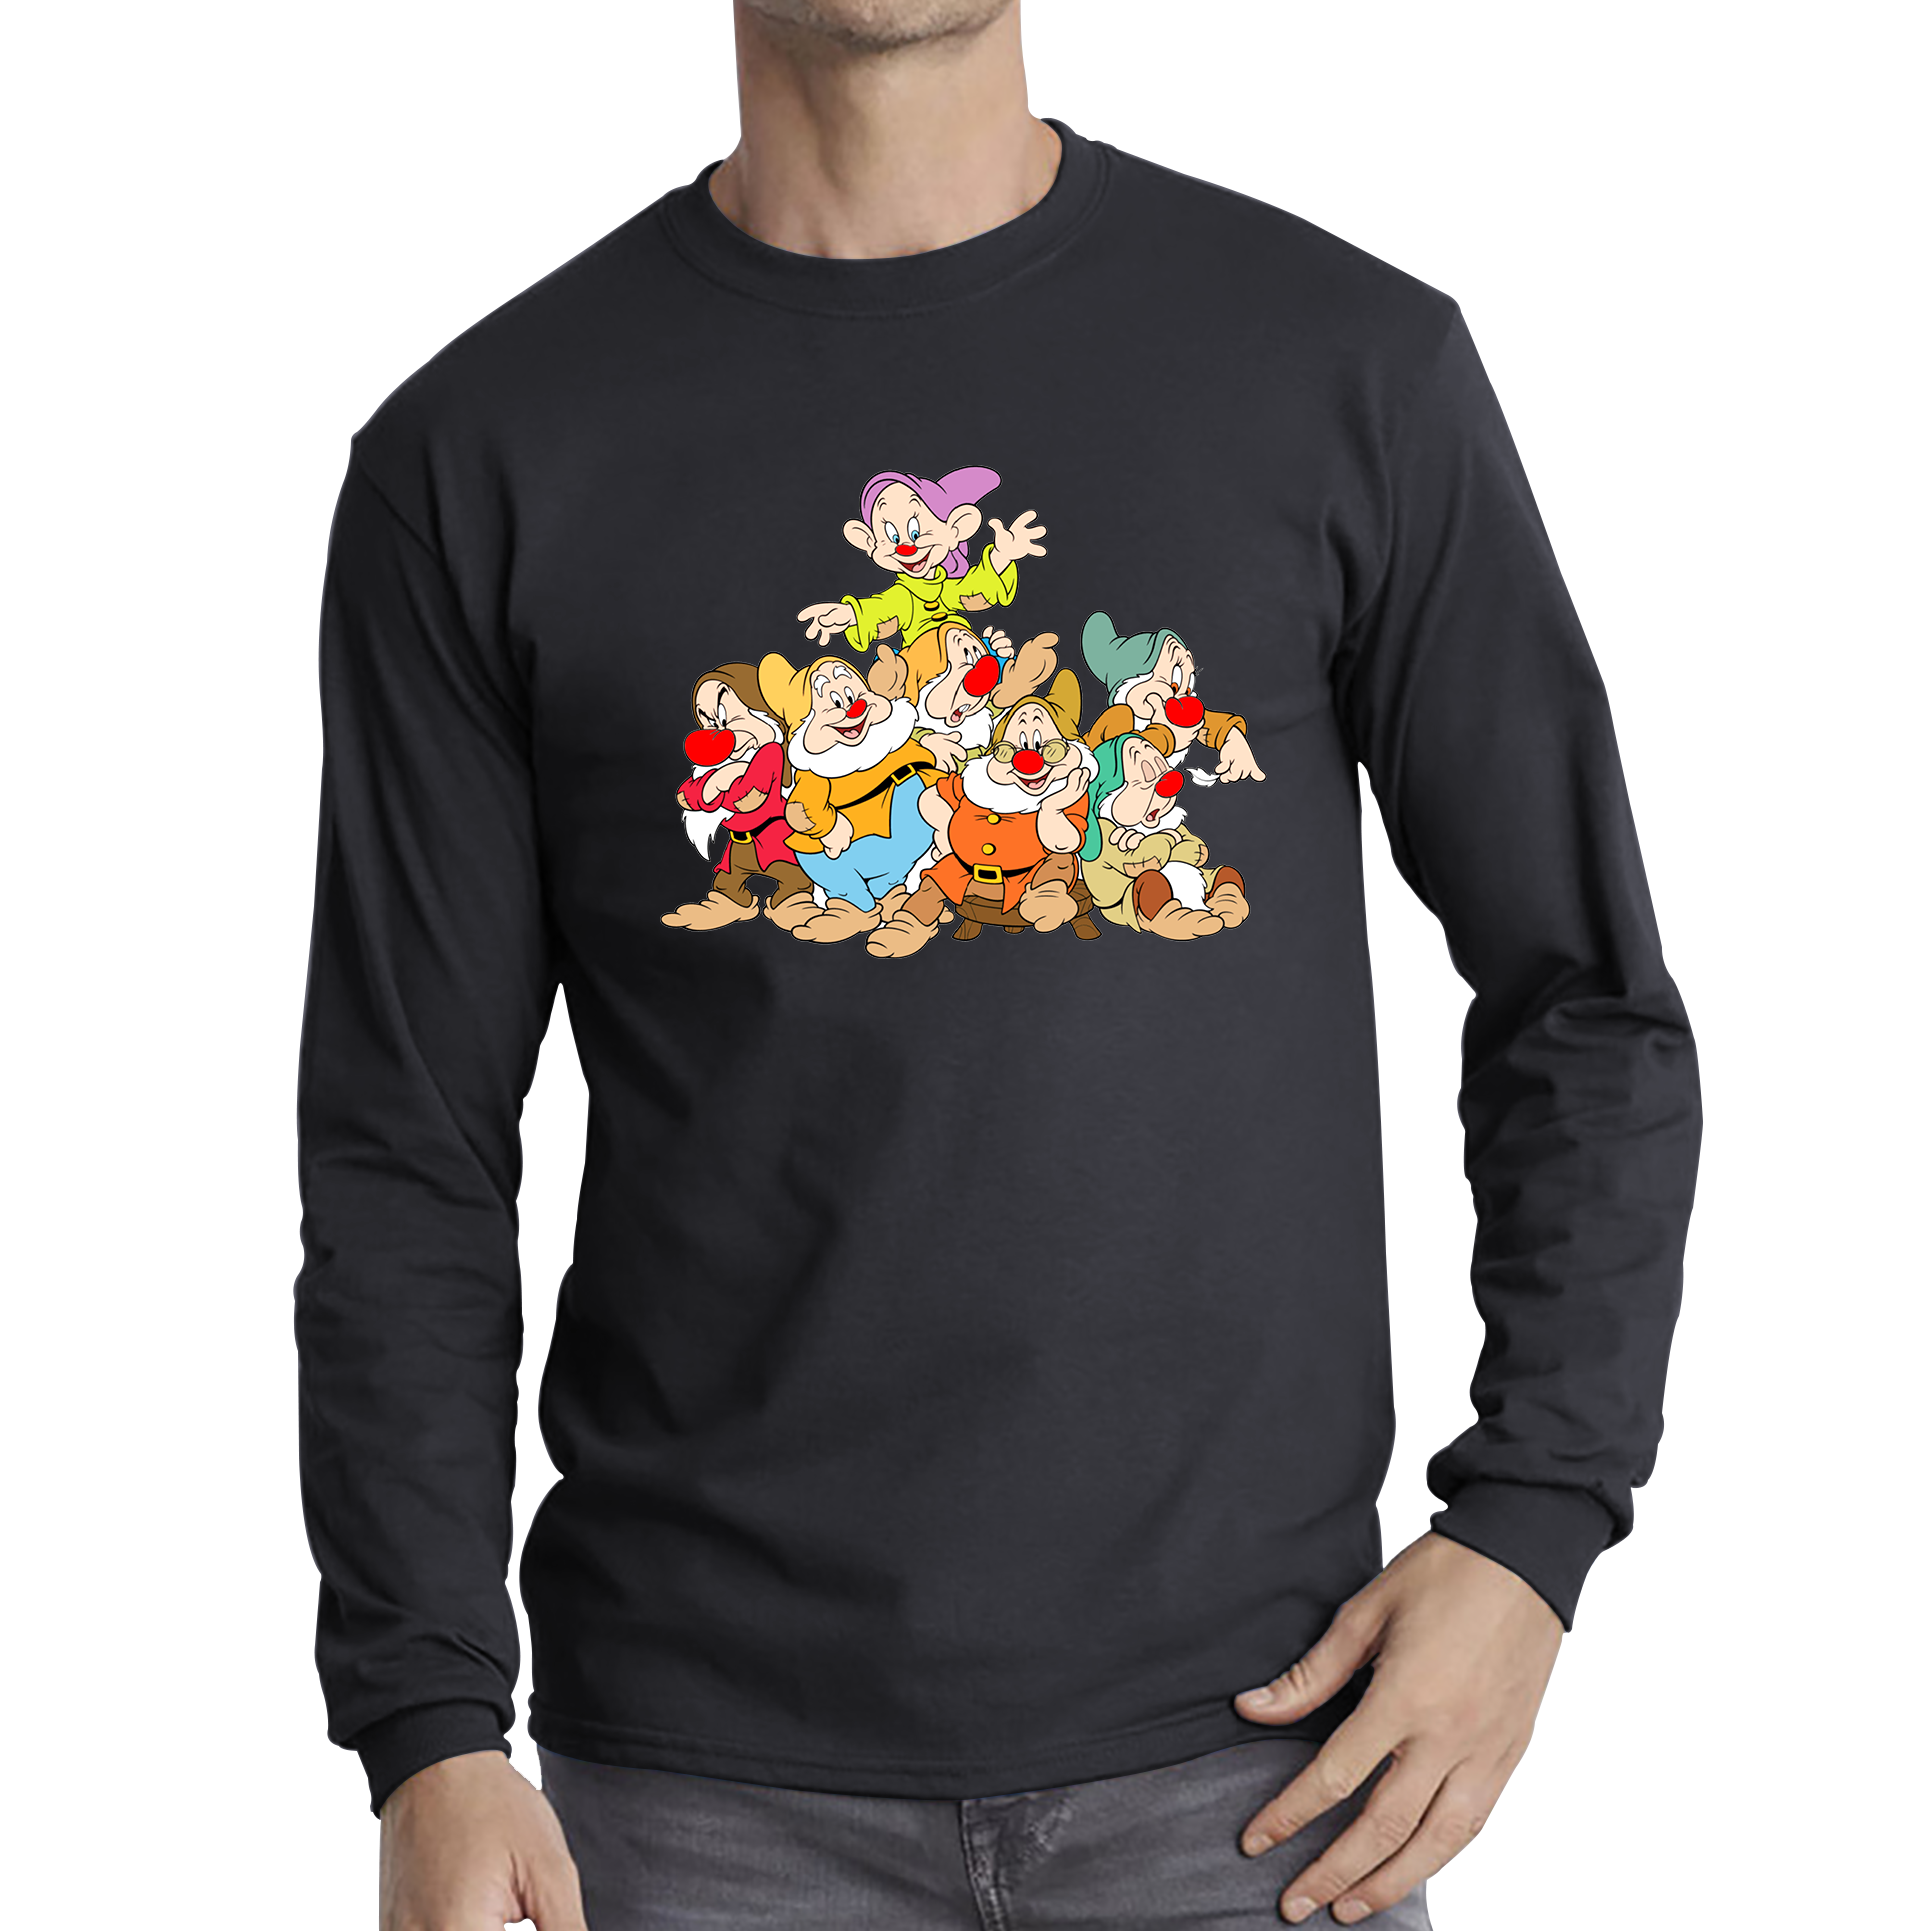 Disney Snow White and Seven Dwarfs Red Nose Day Adult Long Sleeve T Shirt. 50% Goes To Charity